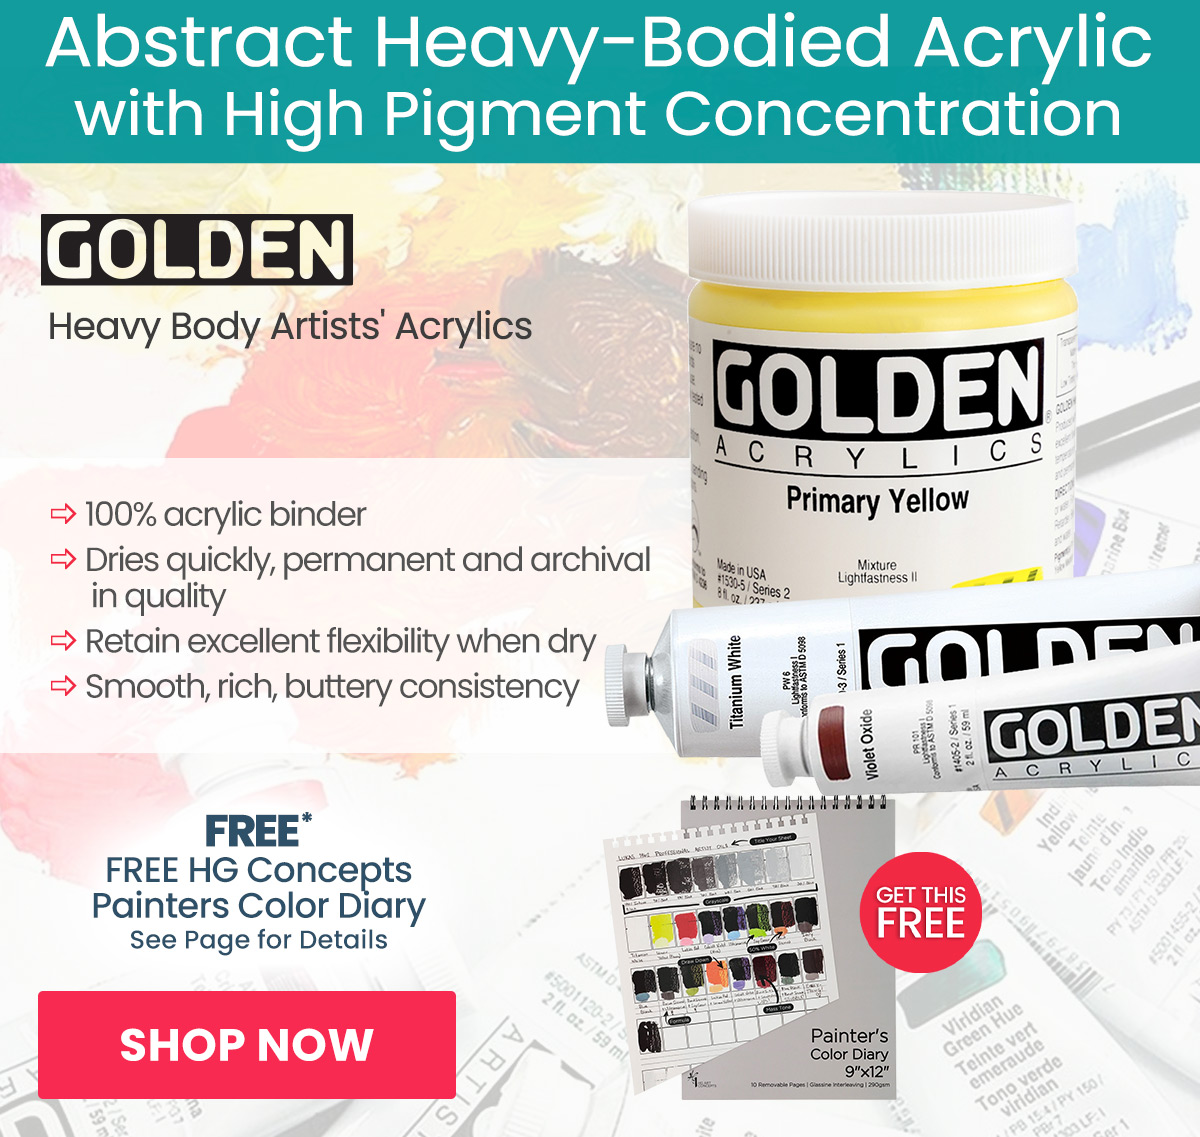 Free Gift with Purchase - Golden Heavy Body Acrylics